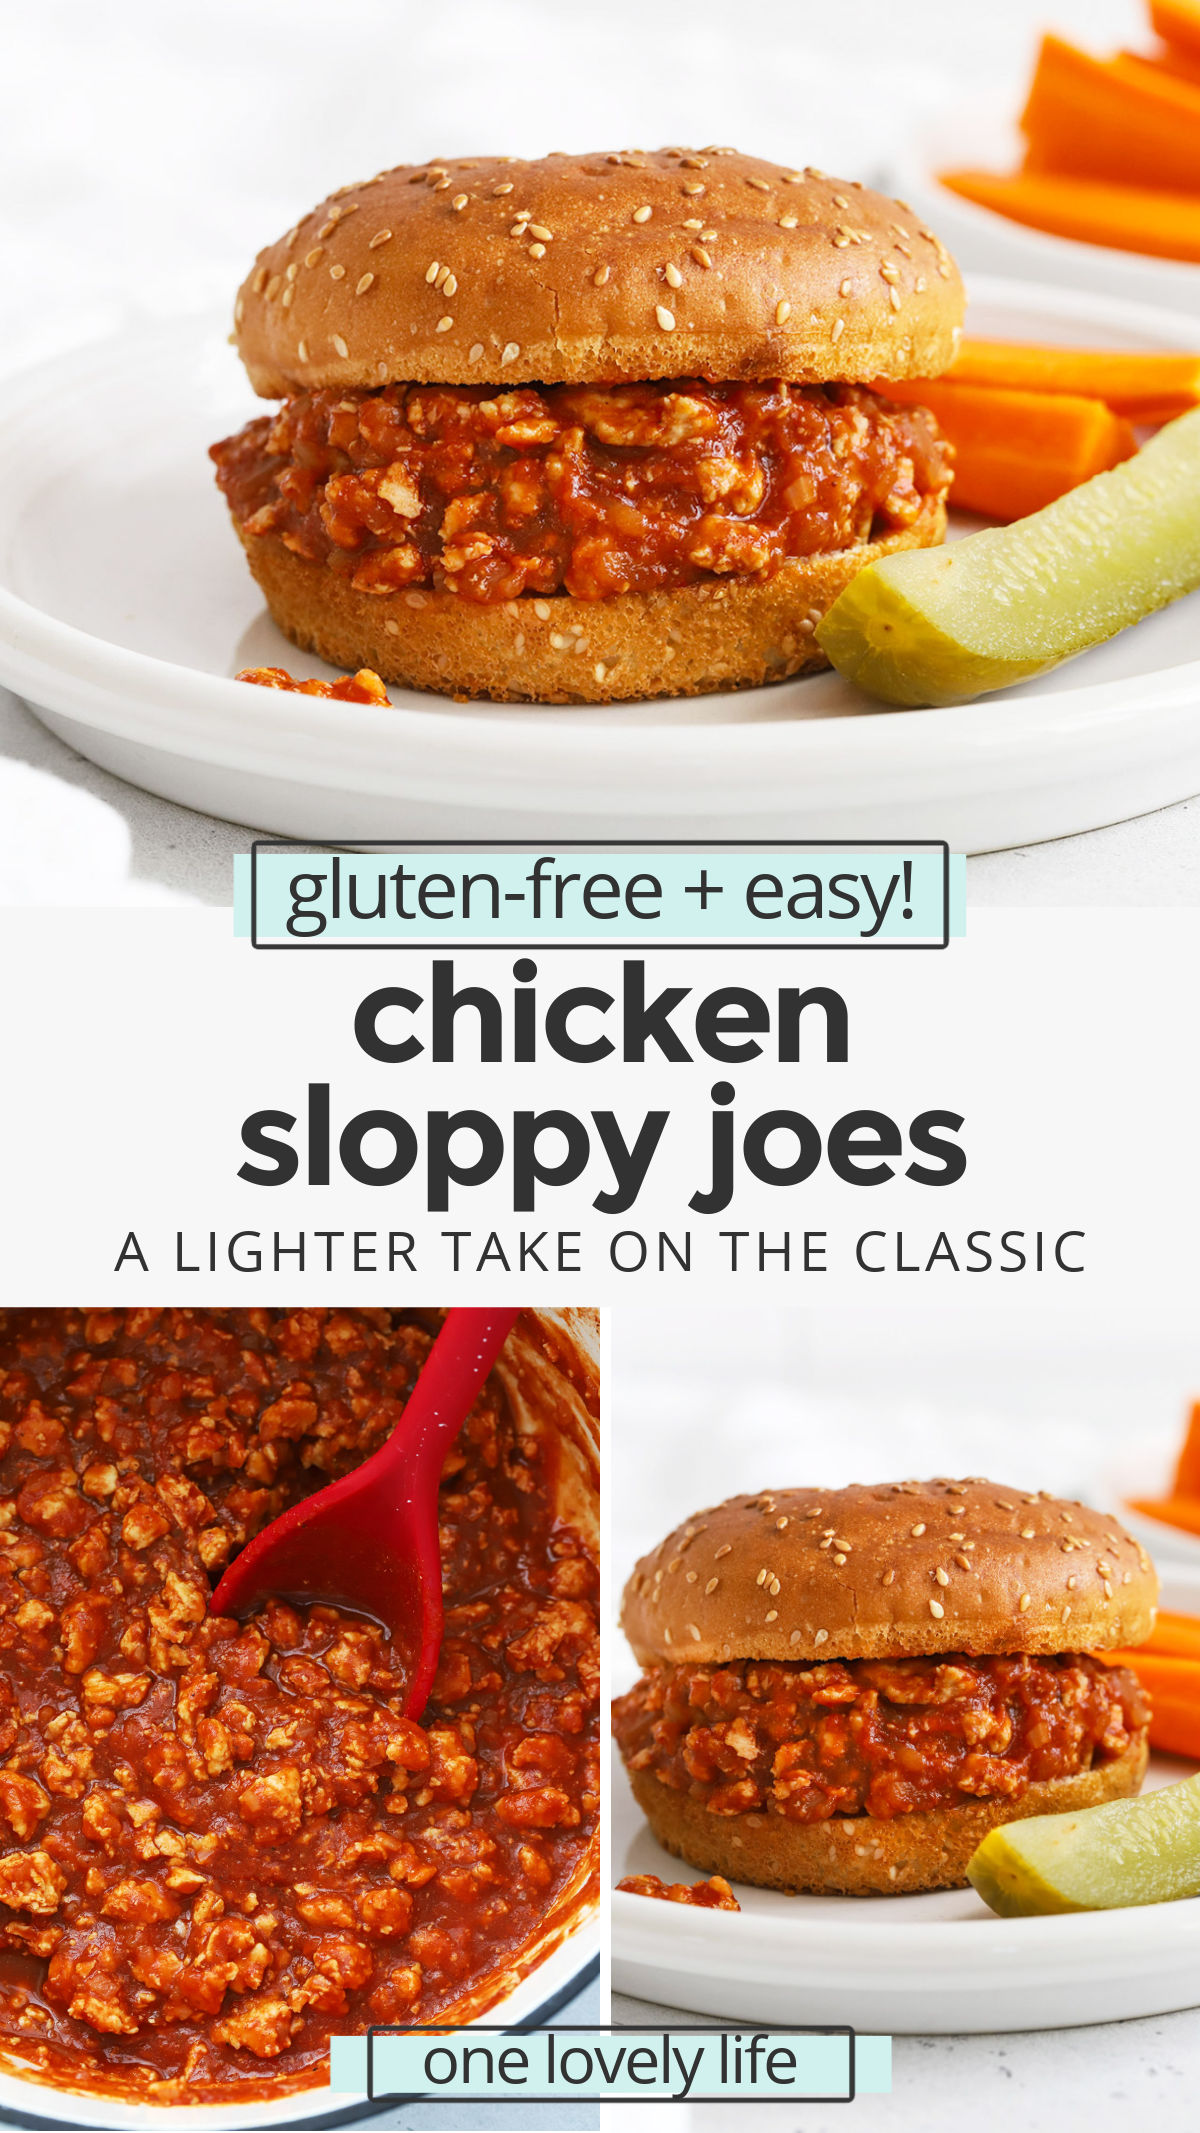 Healthy Chicken Sloppy Joes - These healthy sloppy joes are a lighter take on the classic! You'll love the savory sauce and all our favorite ways to serve them! // Healthy Sloppy Joes Recipe // Chicken Sloppy Joe Recipe // Healthy Dinner // Sloppy Joes Recipe //